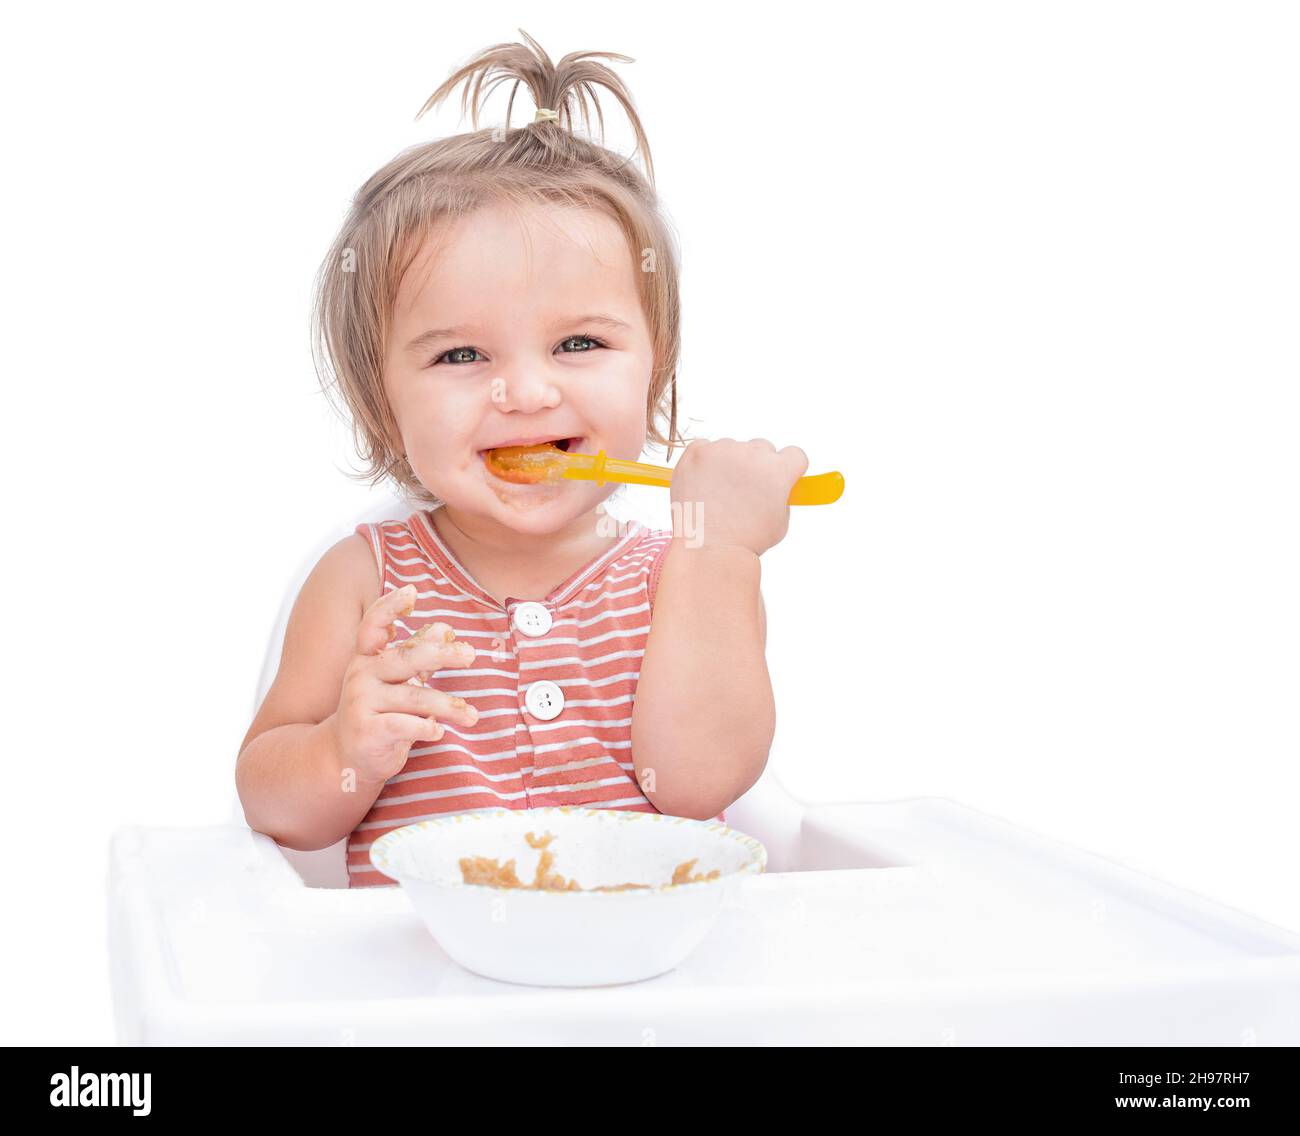 Baby sitting in chair and eating porridge with spoon isolated on white background Stock Photo